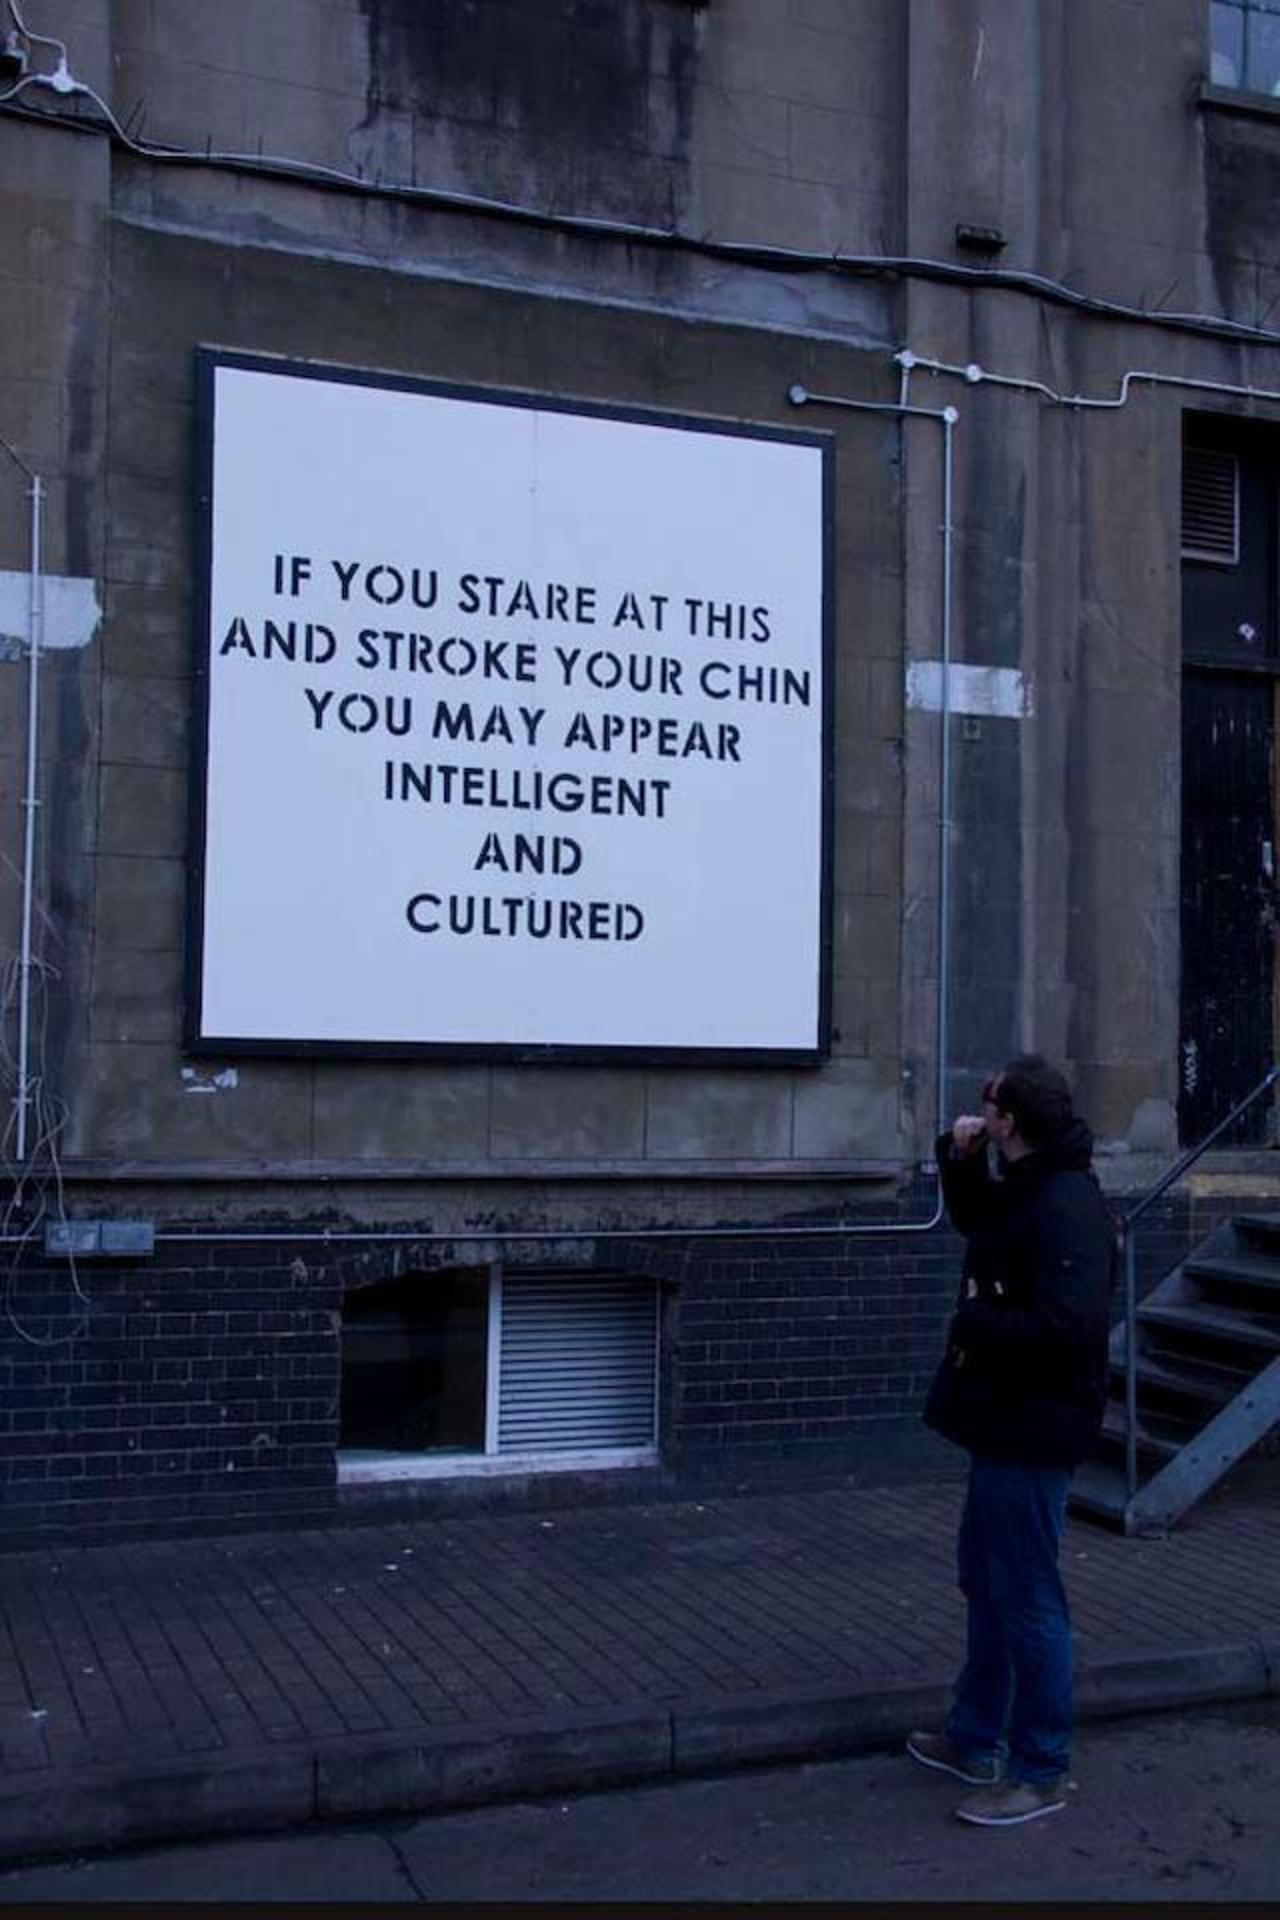 Awesome street art statements by Mobstr. Check it out: http://bit.ly/NiumeMobstr #creative #streetart https://t.co/JSmlBNGv3U